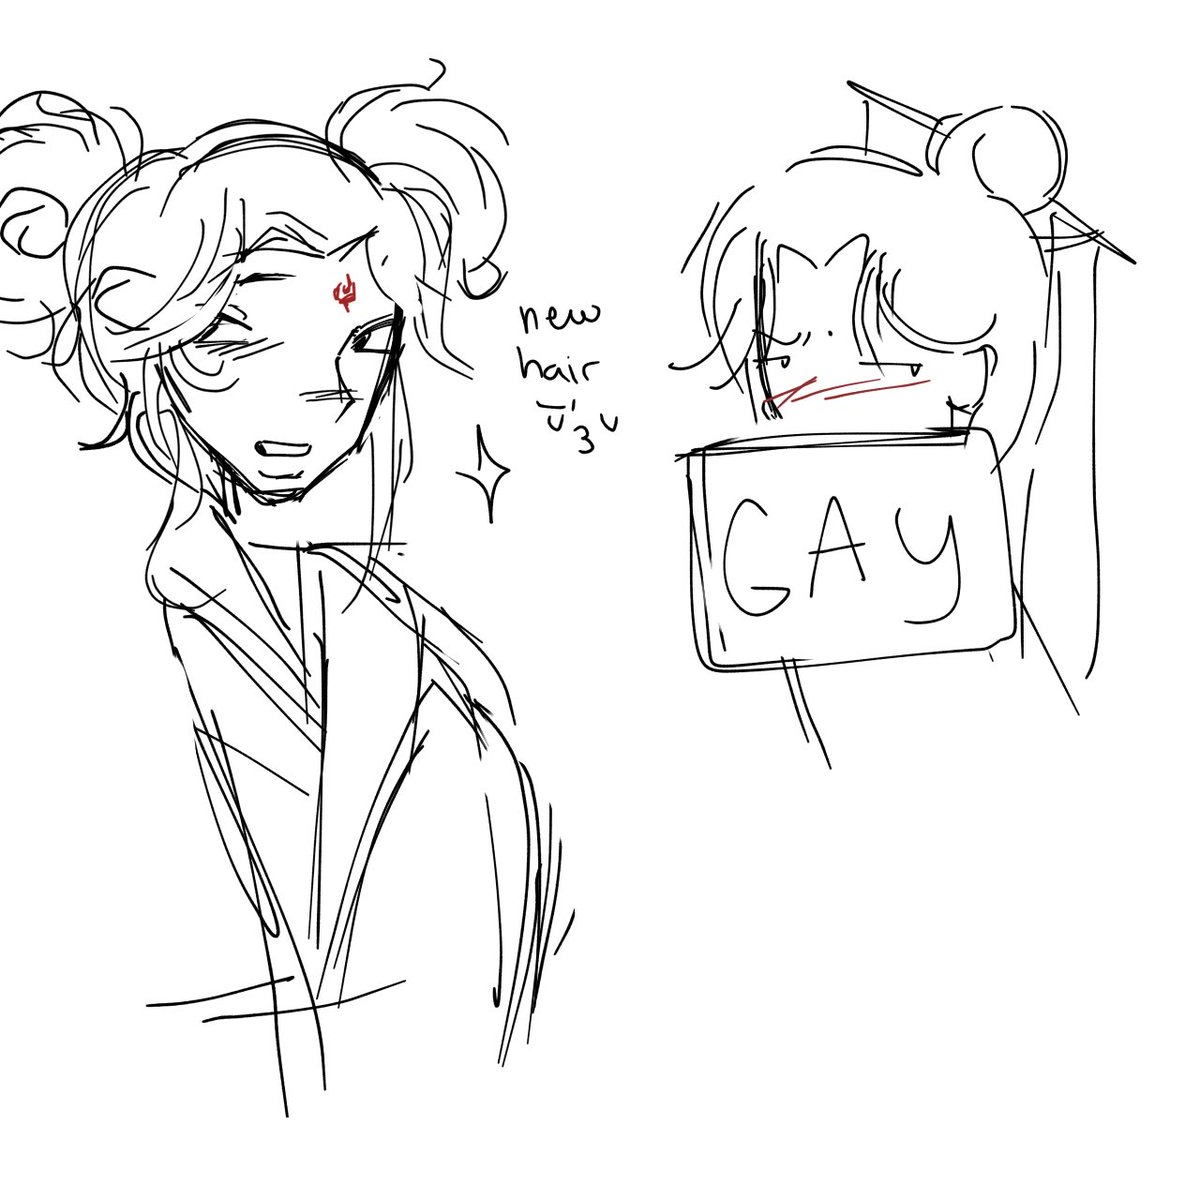 the gf drew some faggatrons!  be mindful that she doesn’t know much of these characters and shes going off by bery little knowledge!!!!

#svsss #loubinghe #Shenjiu #bingjiu